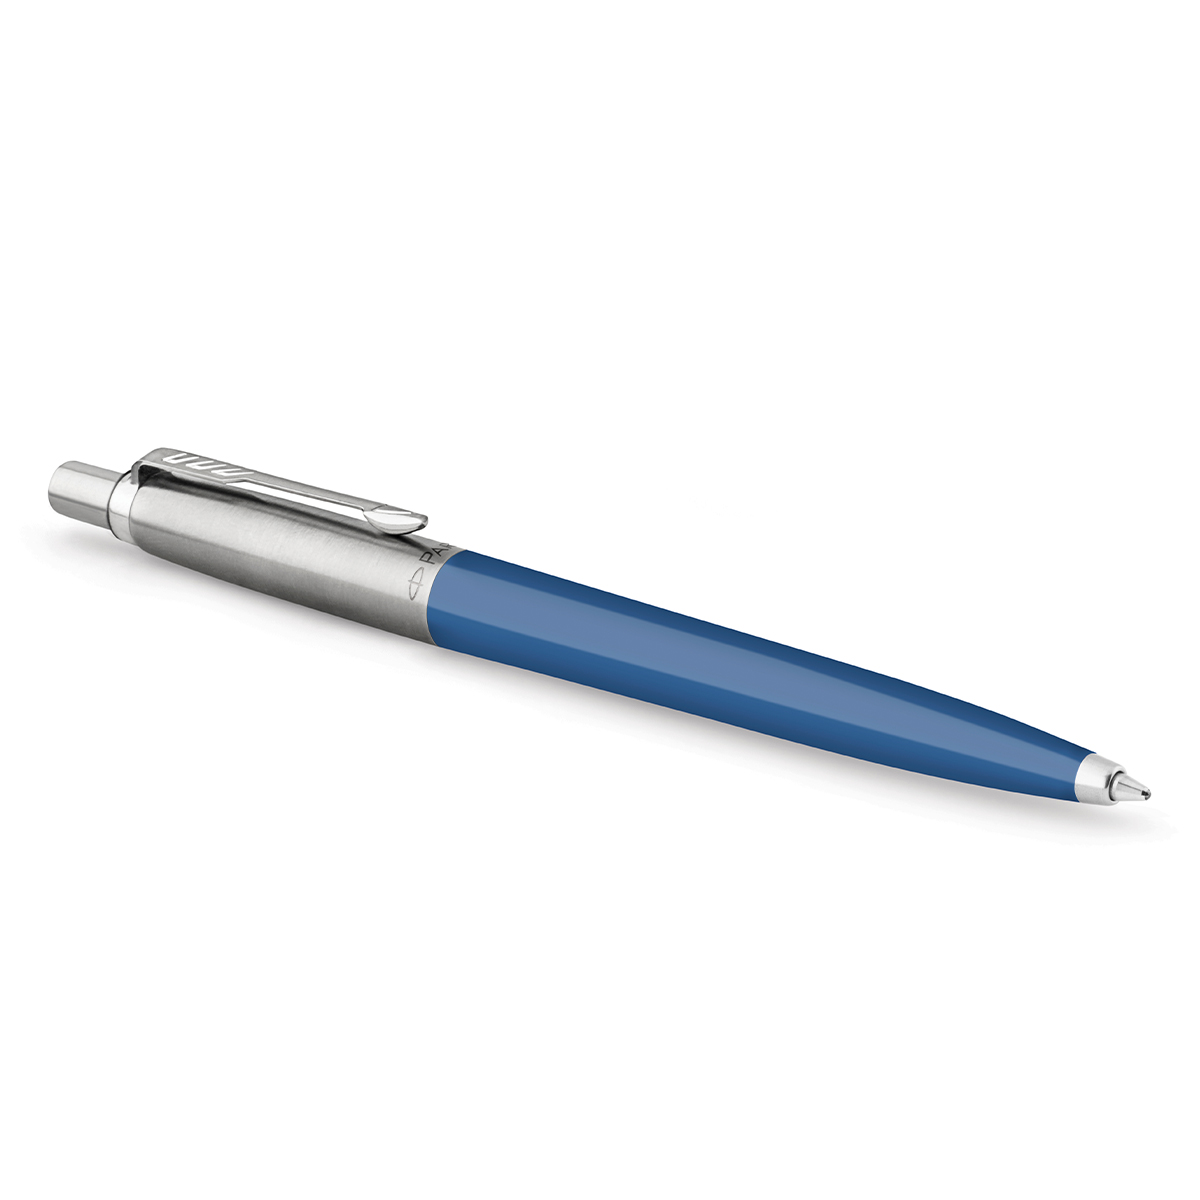 Fisher Space Pen Refill Parker Pen Style Ball Point Write UNDER Water Med  BLUE